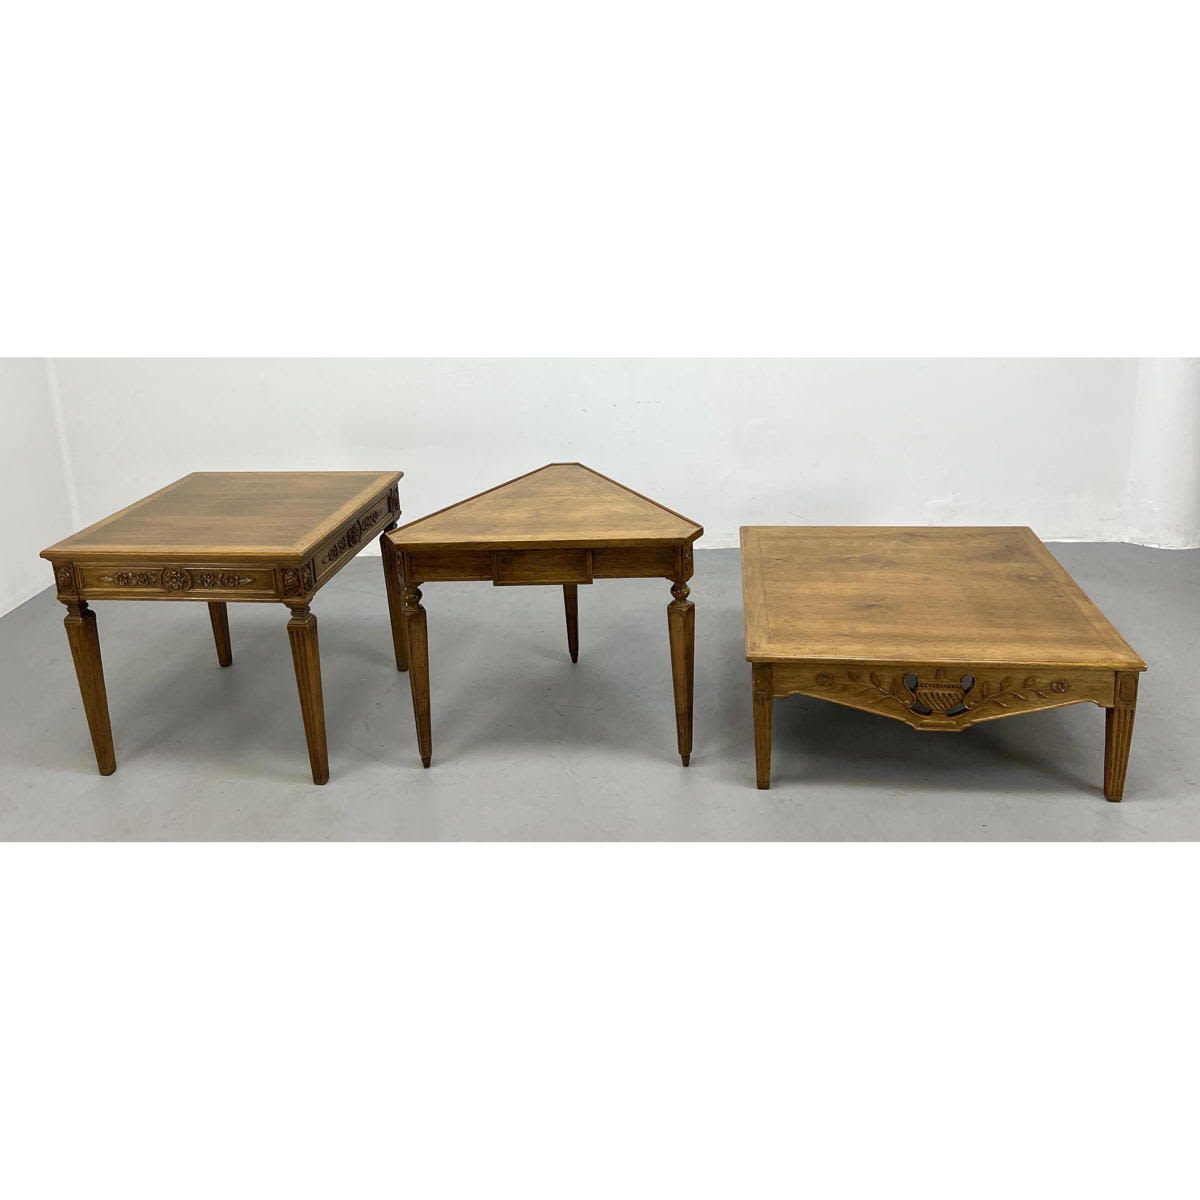 3pcs Country French Style Tables.